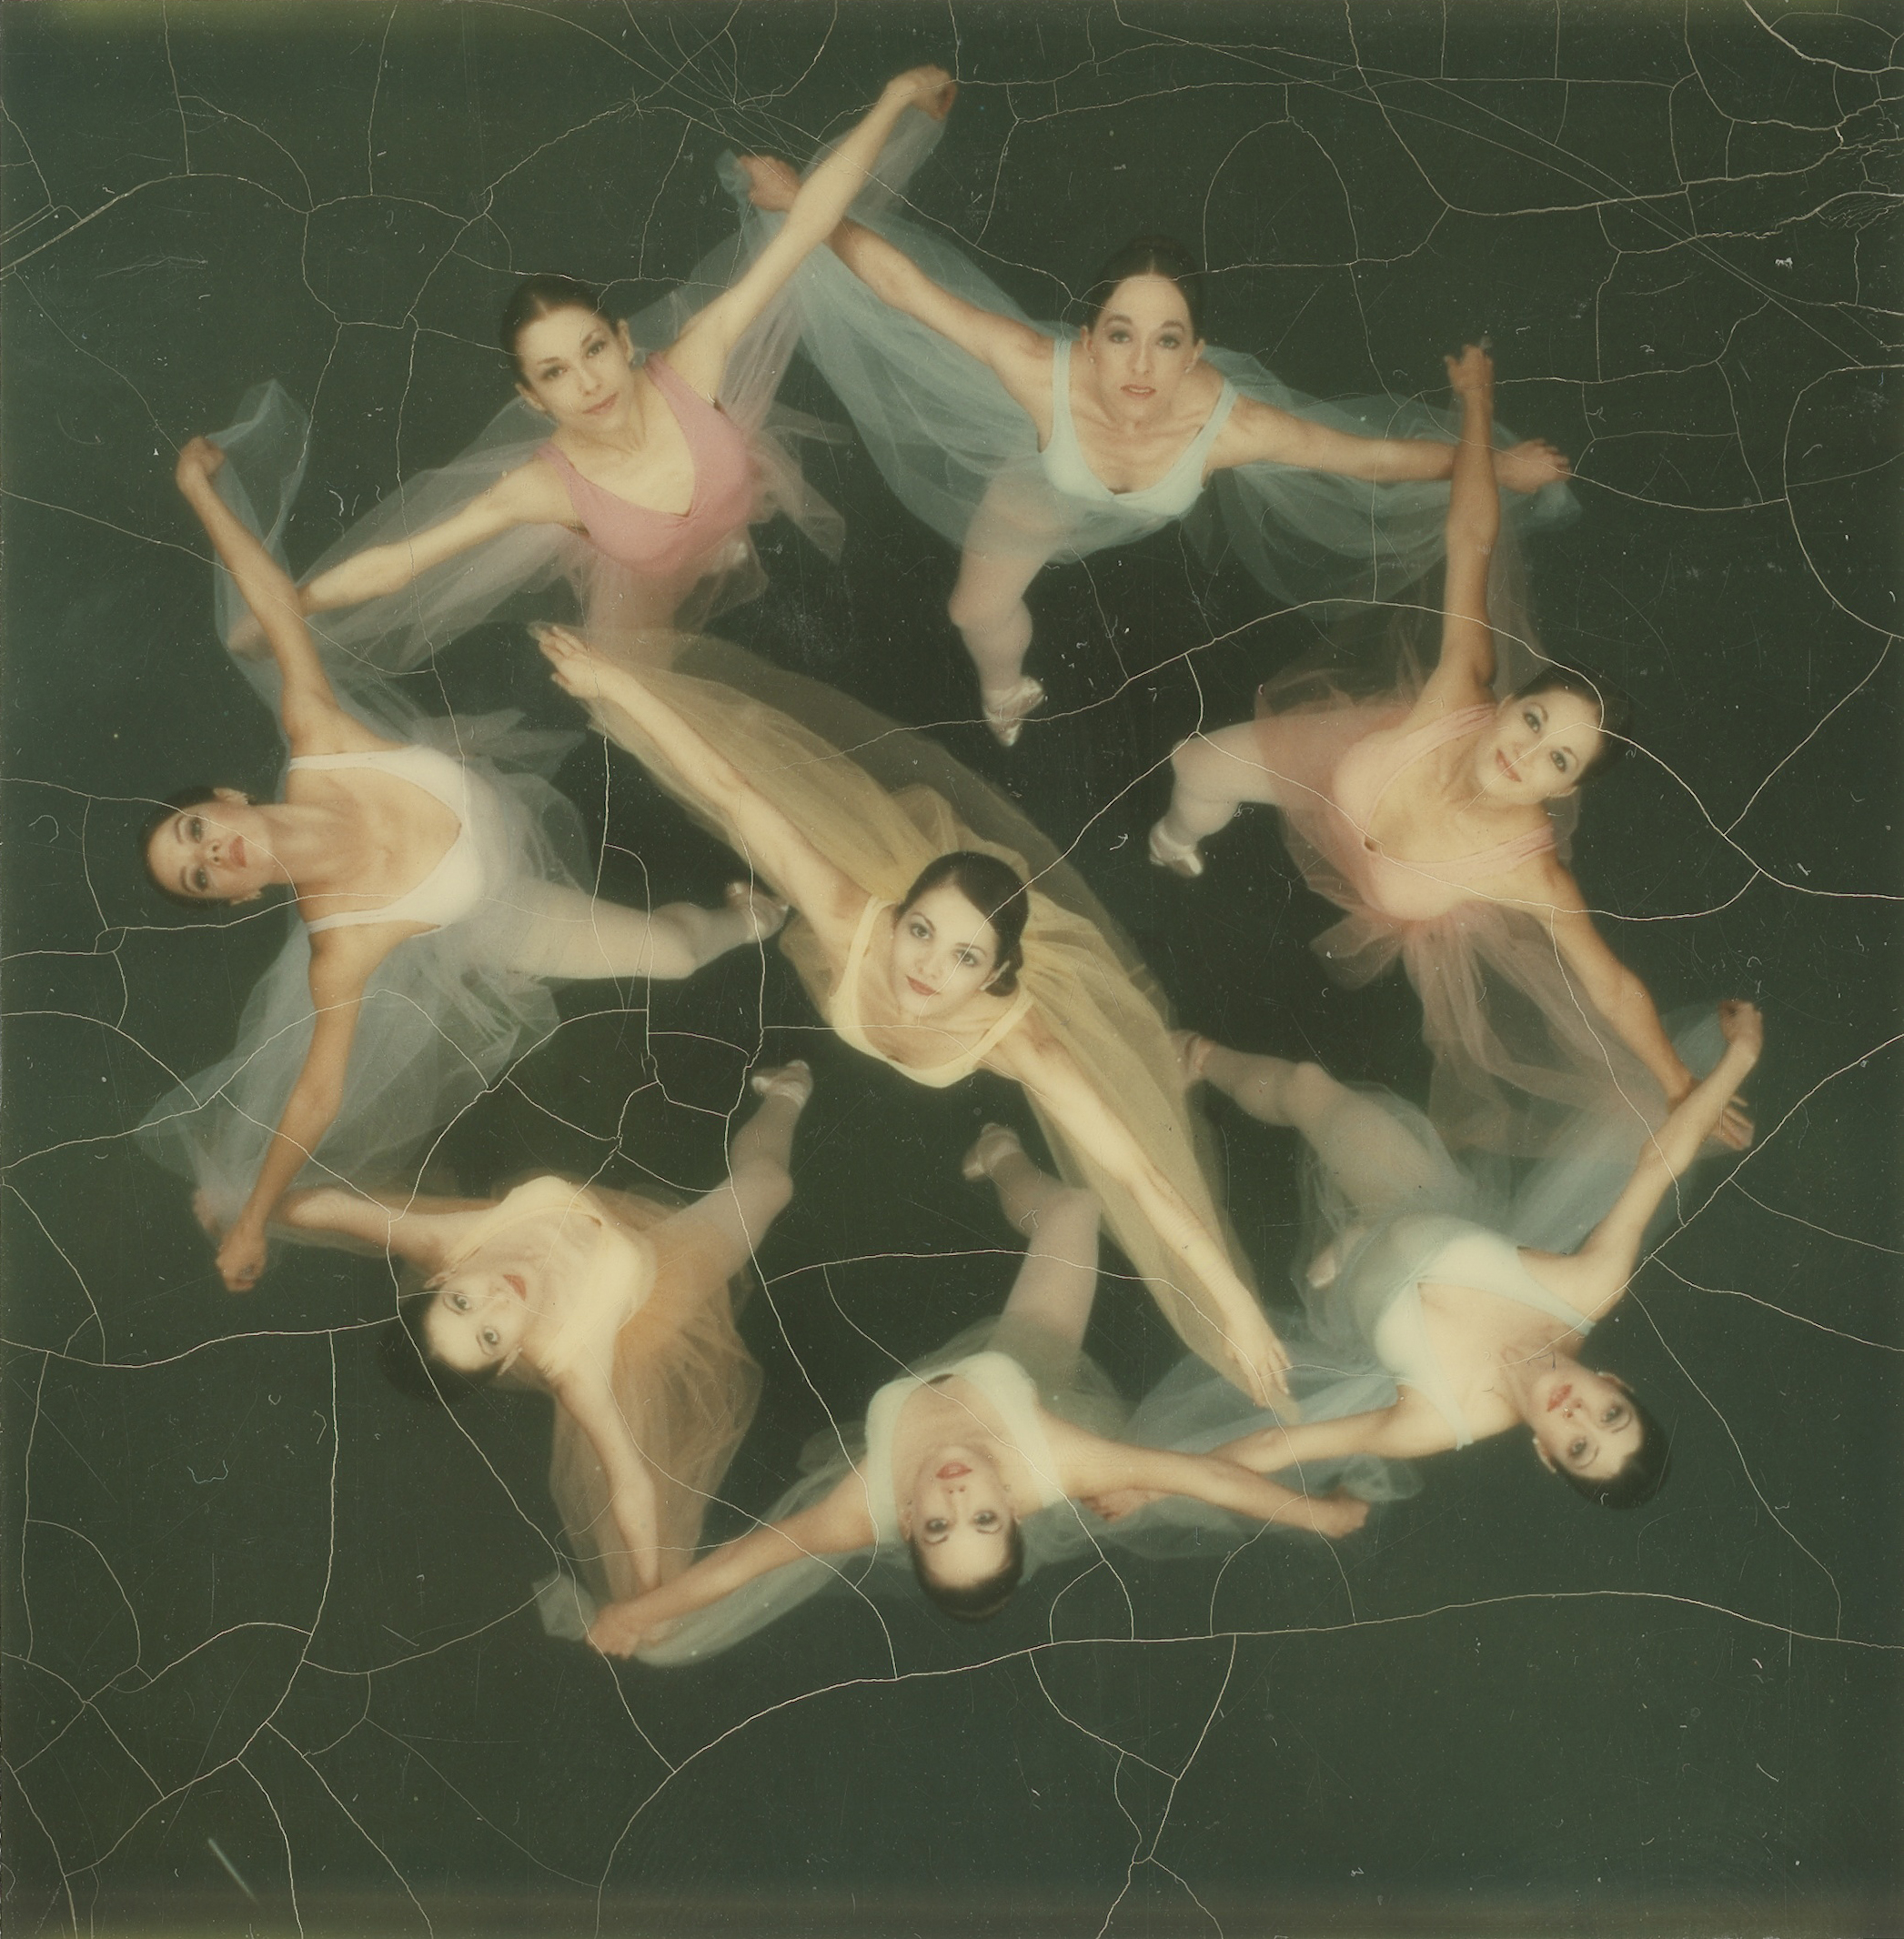 Dancers photographed from above with a Polaroid SX-70 camera, 1972.